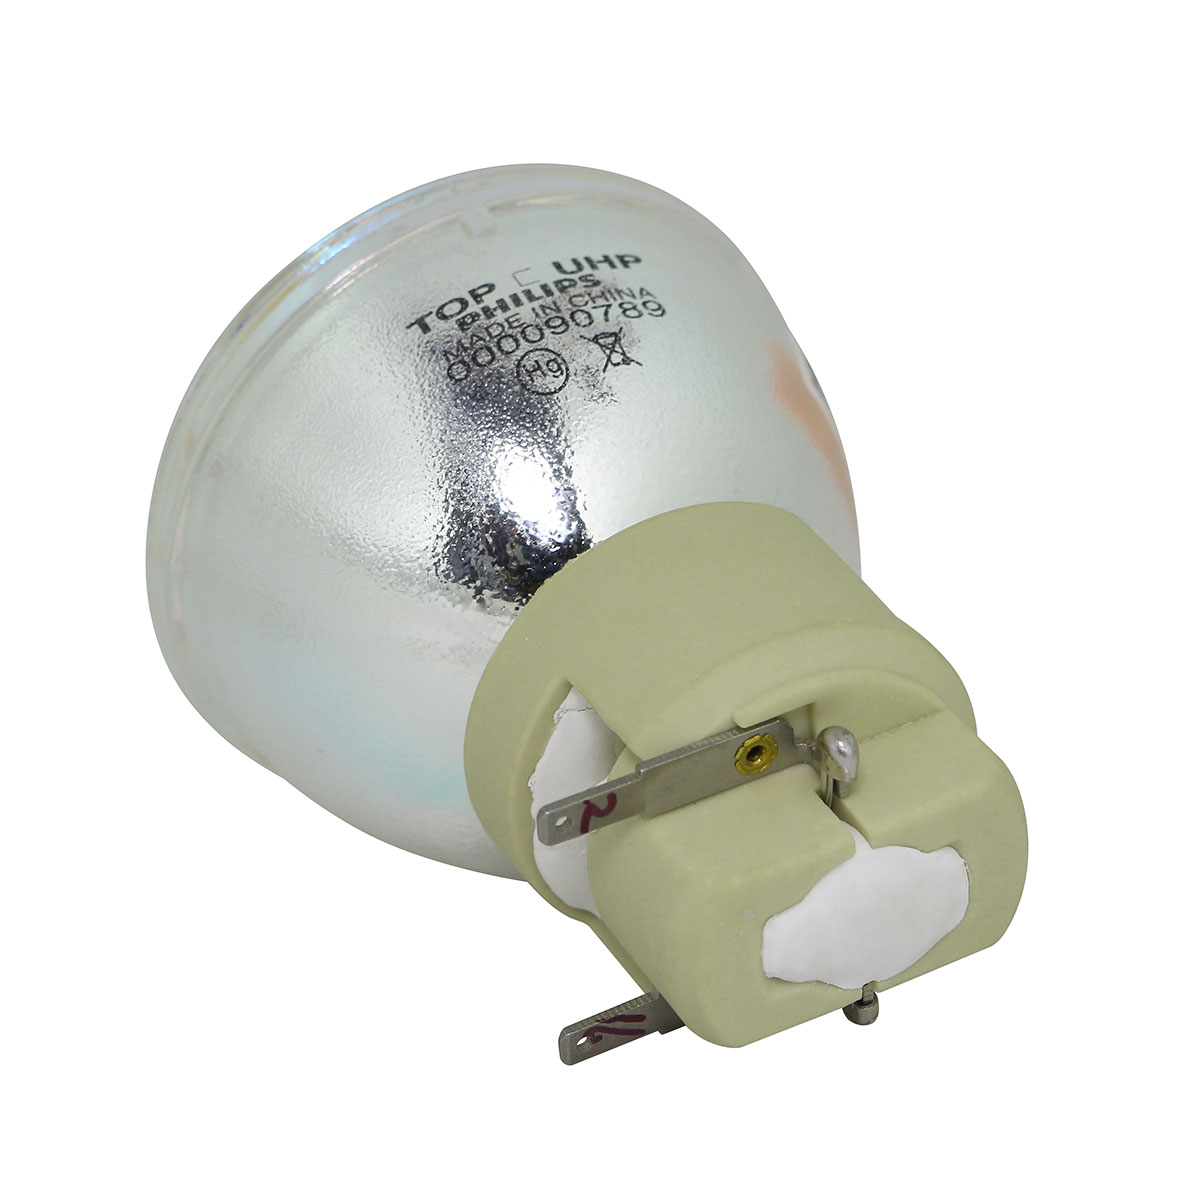 Original Philips Projector Lamp Replacement for InFocus IN112 (Bulb Only) - image 5 of 6